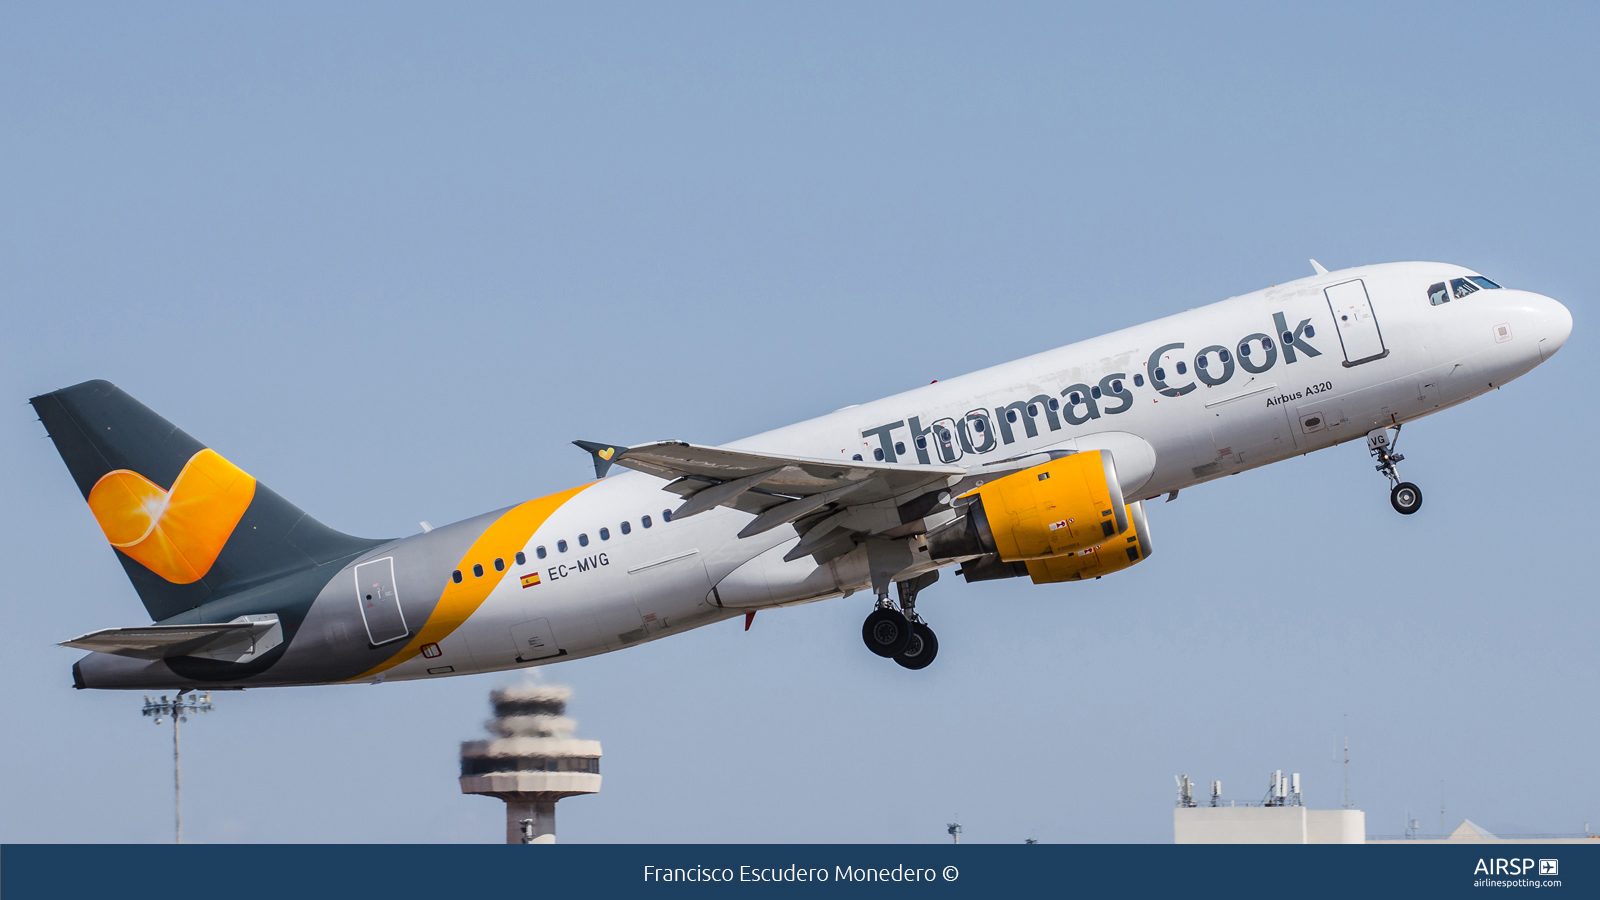 Thomas Cook Airlines  Airbus A320  EC-MVG